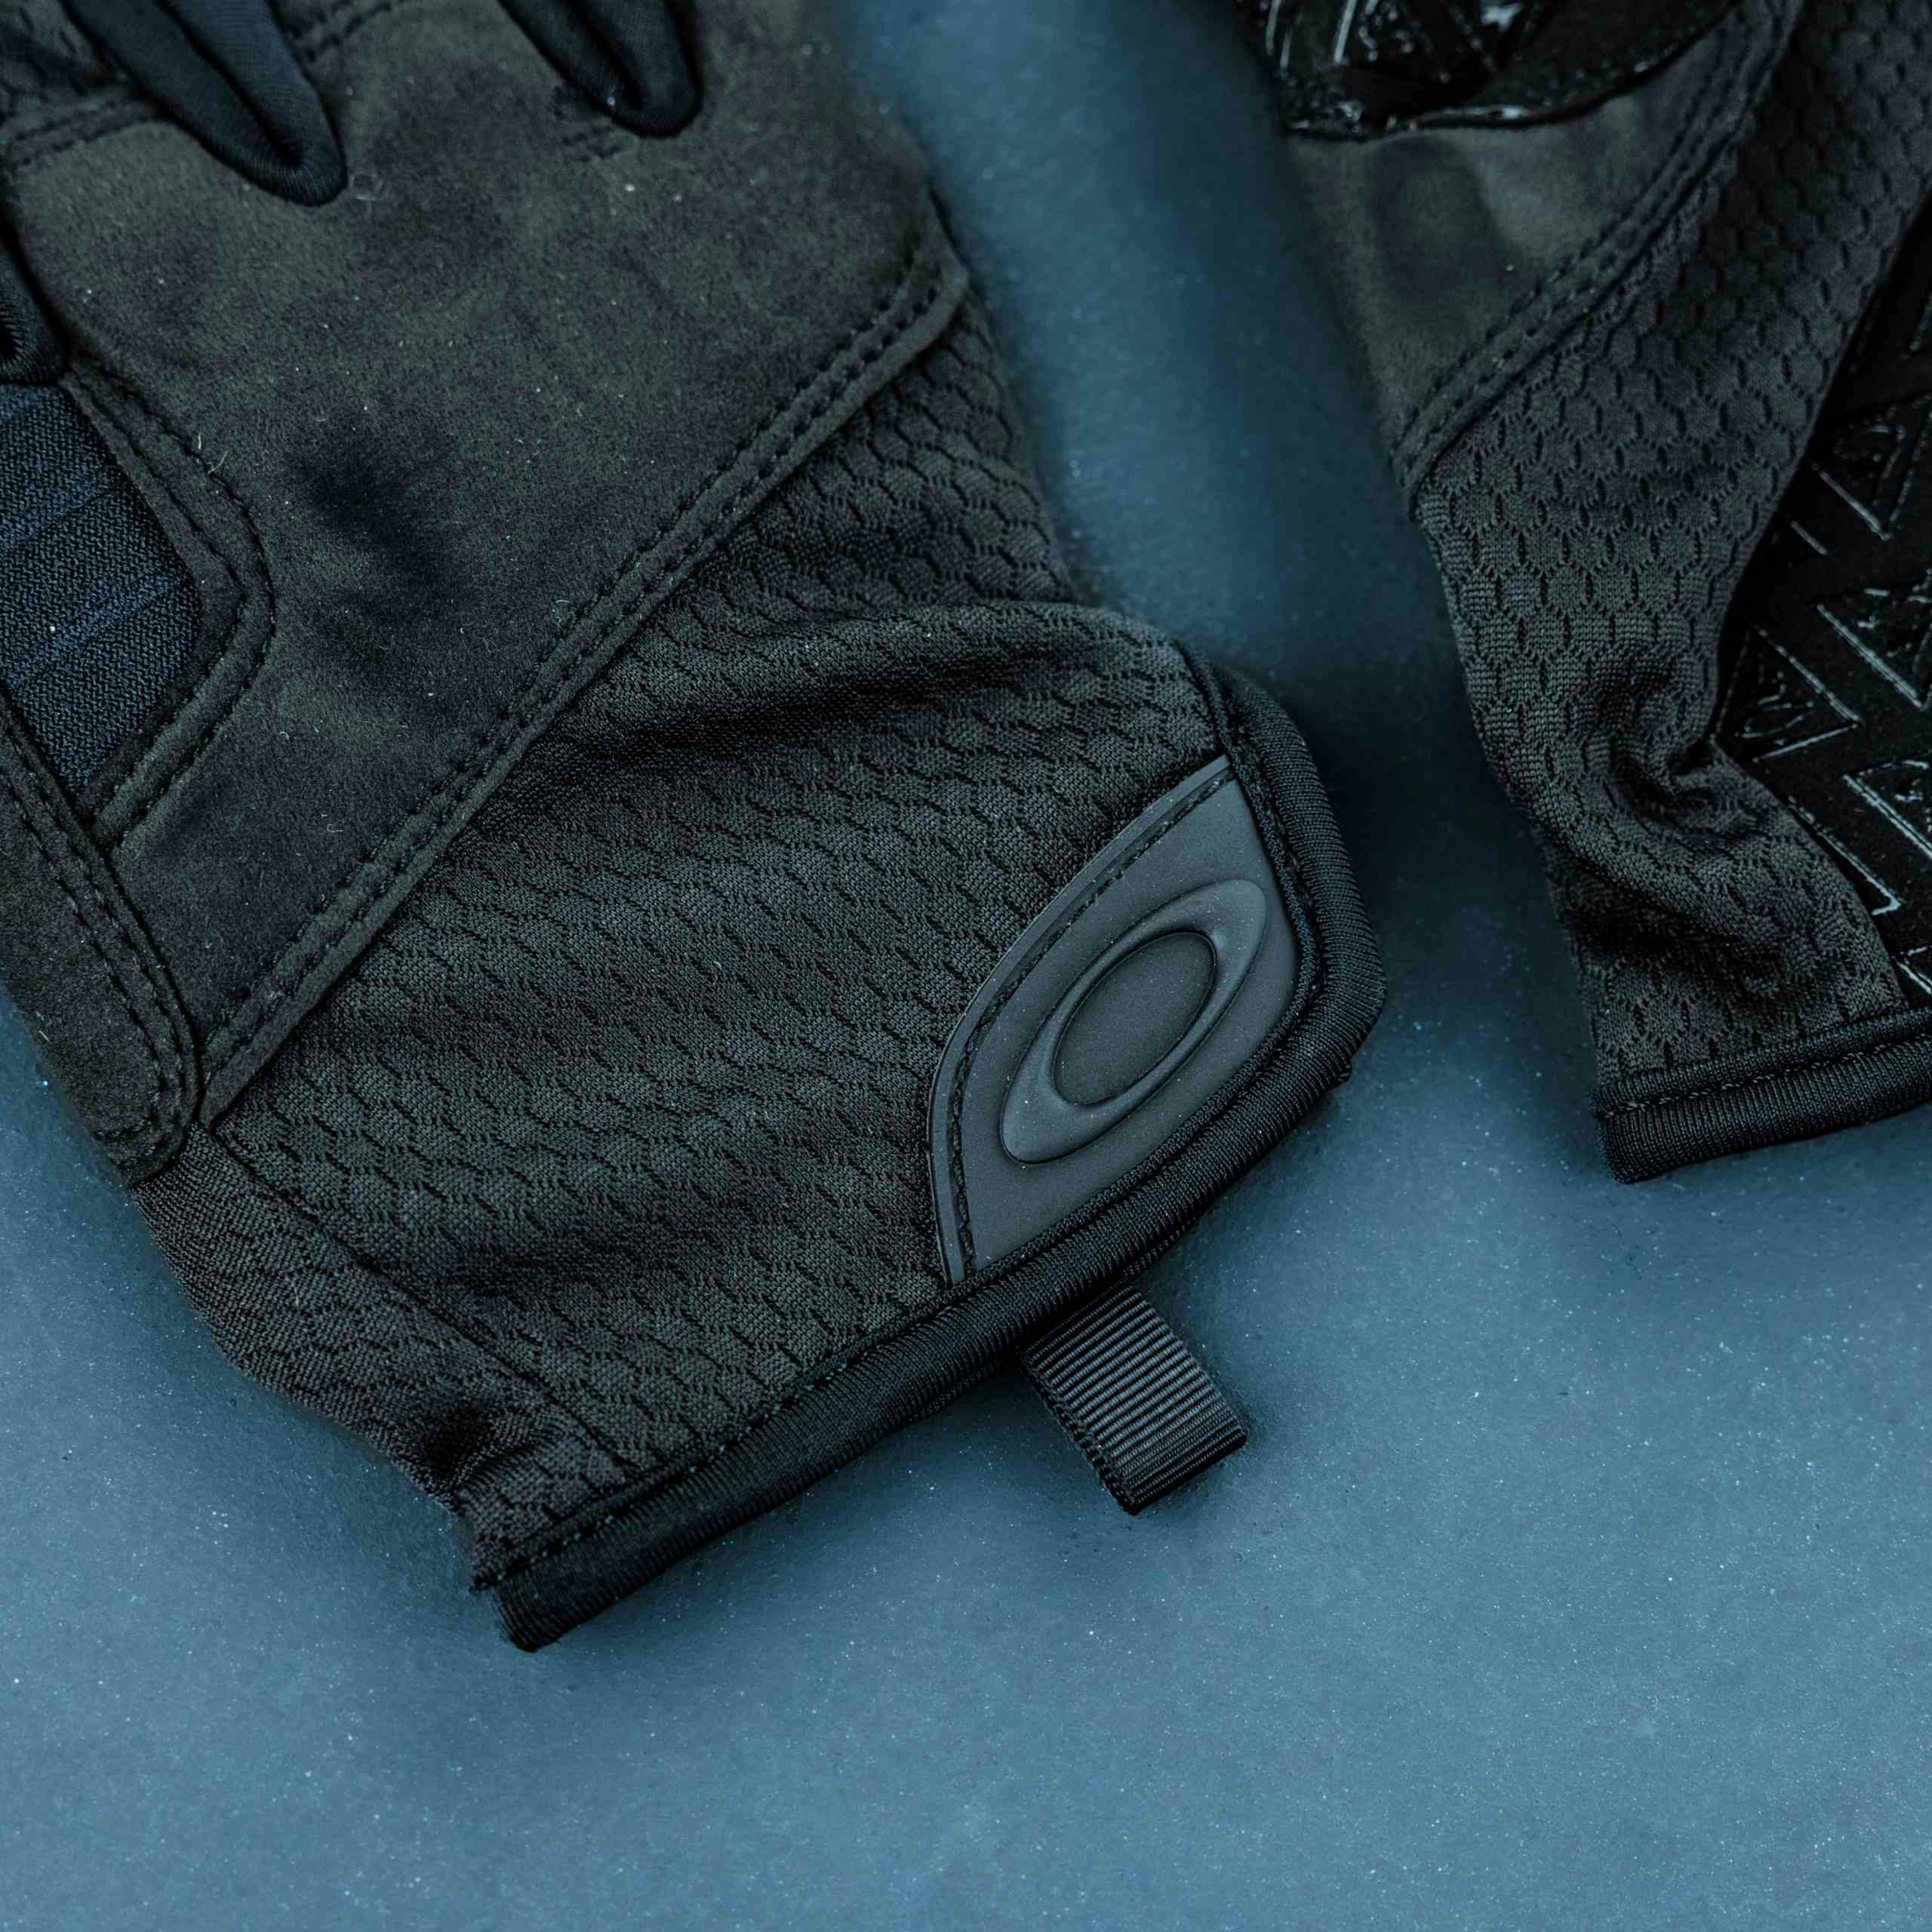 Oakley Factory Lite  Gloves –  ARMS